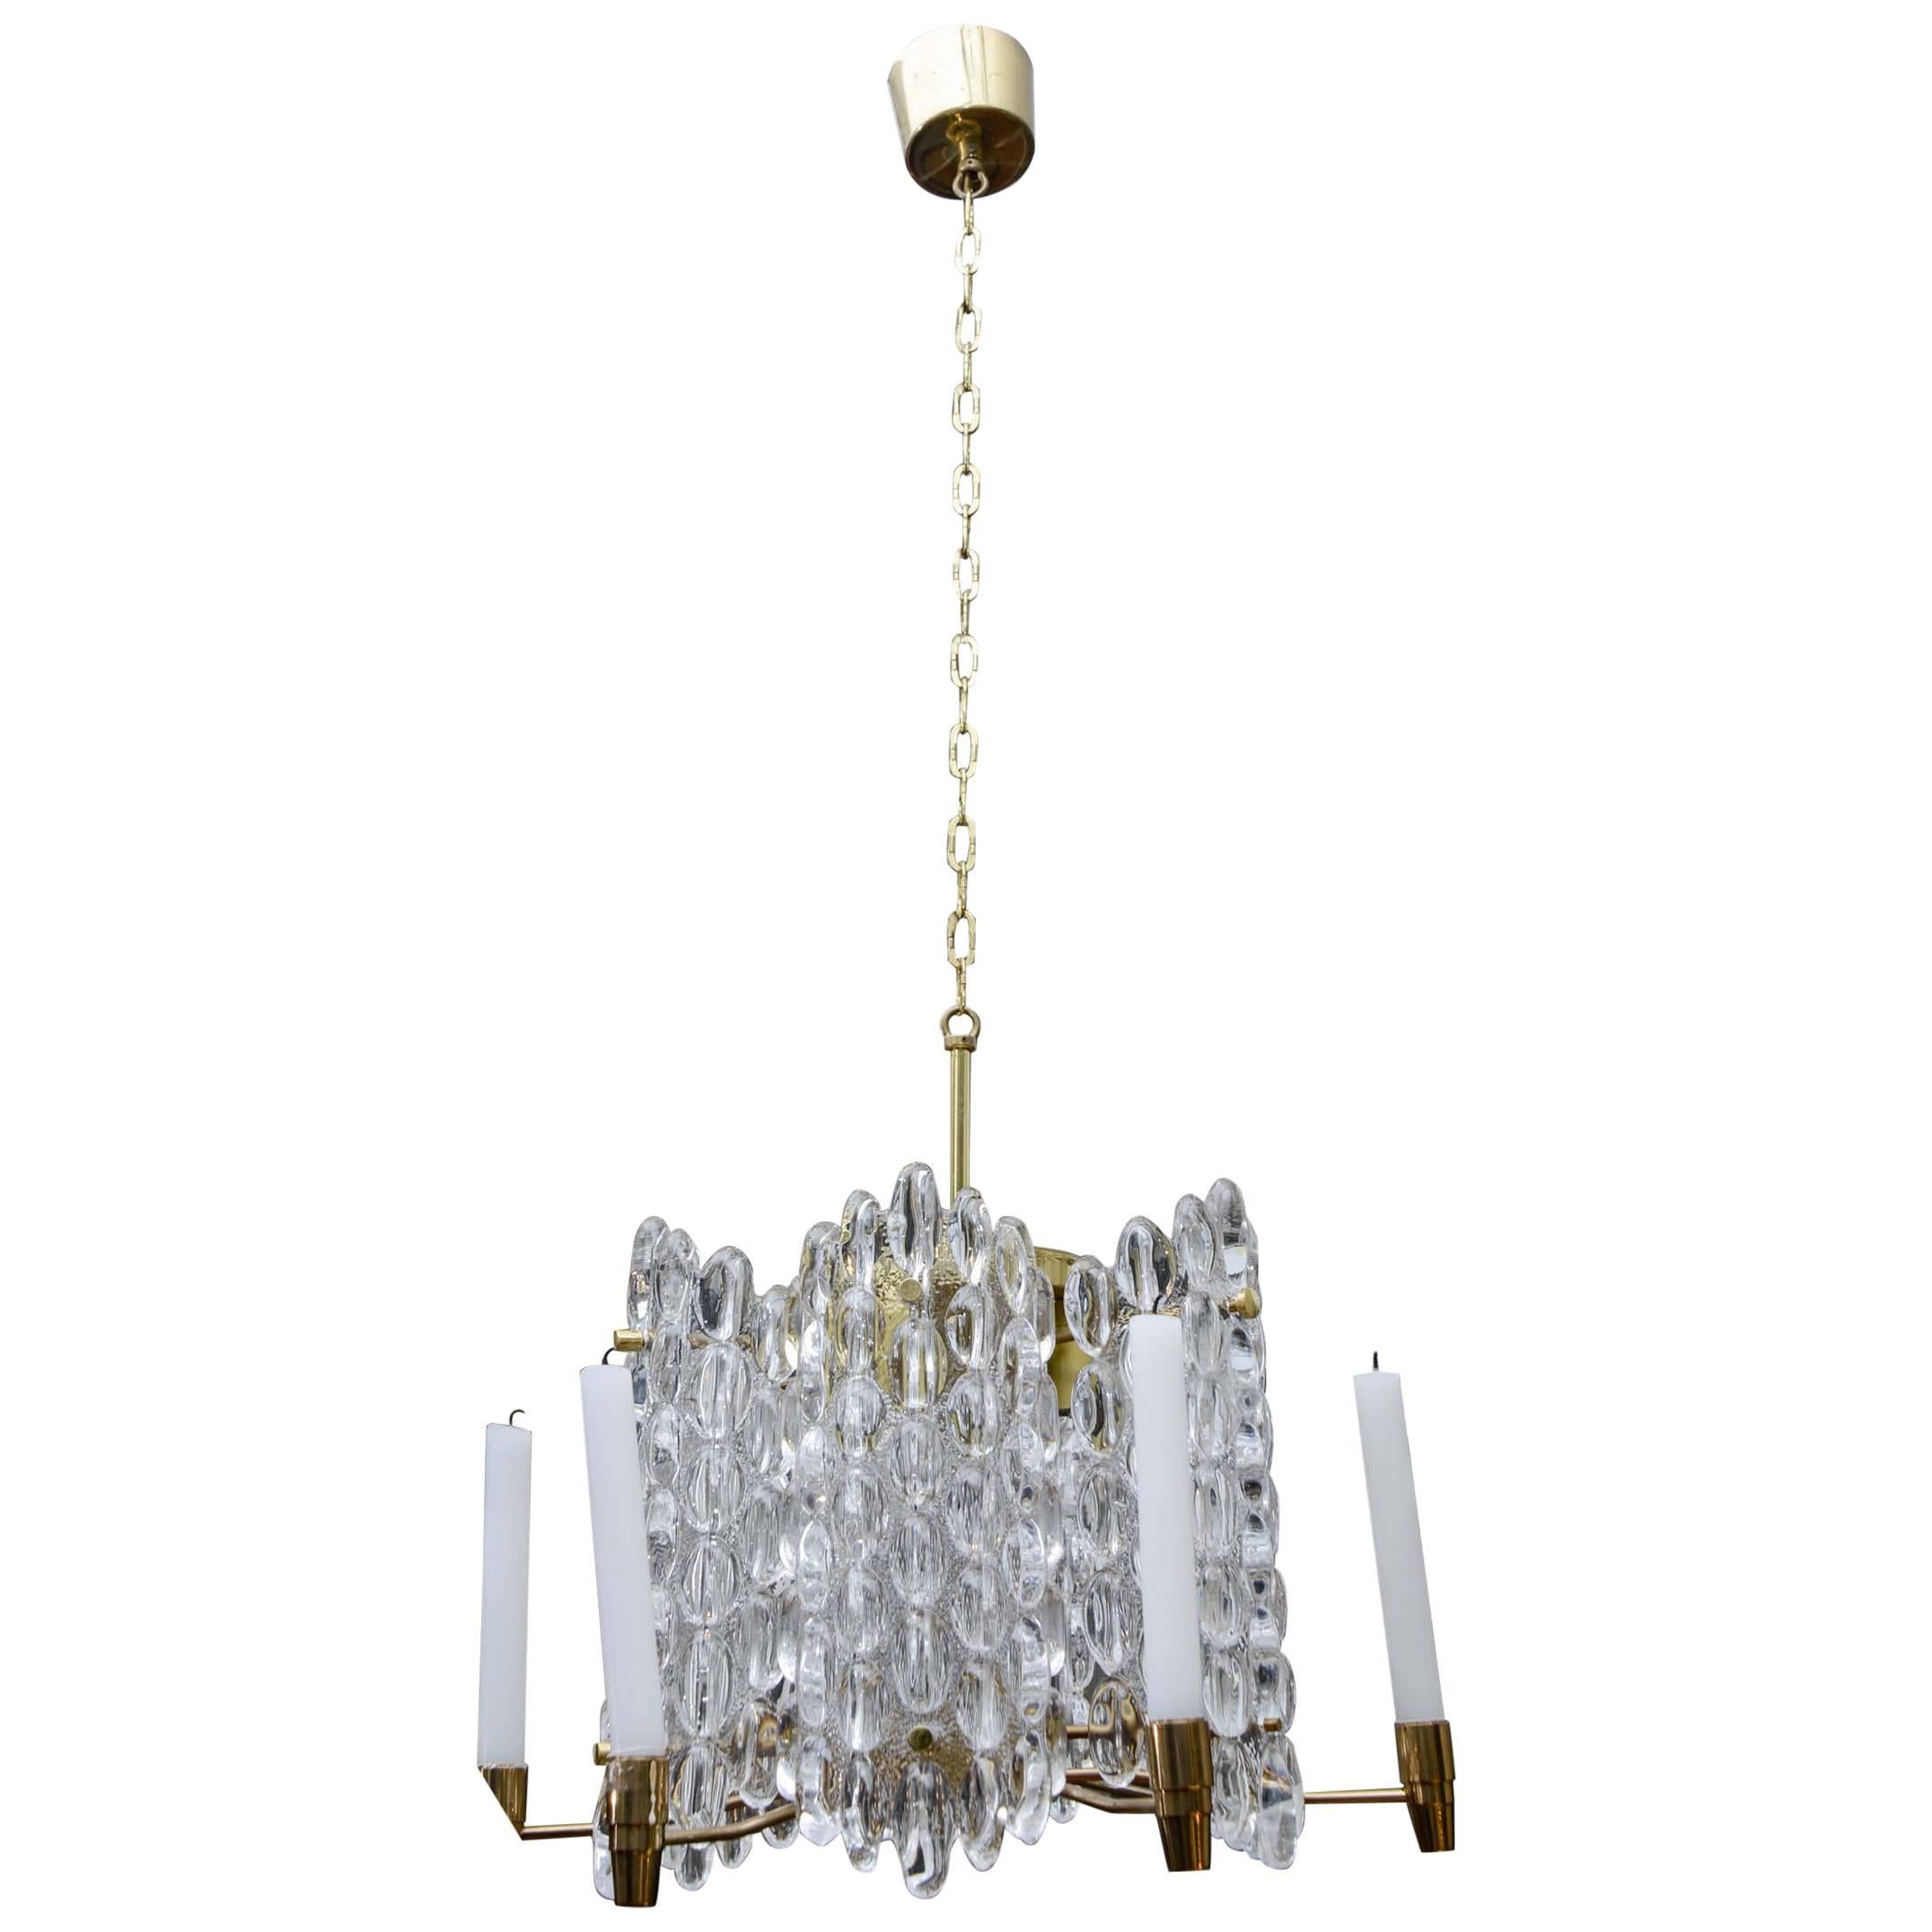 Brass and Crystal Chandelier with Both Electrical and Candles Light